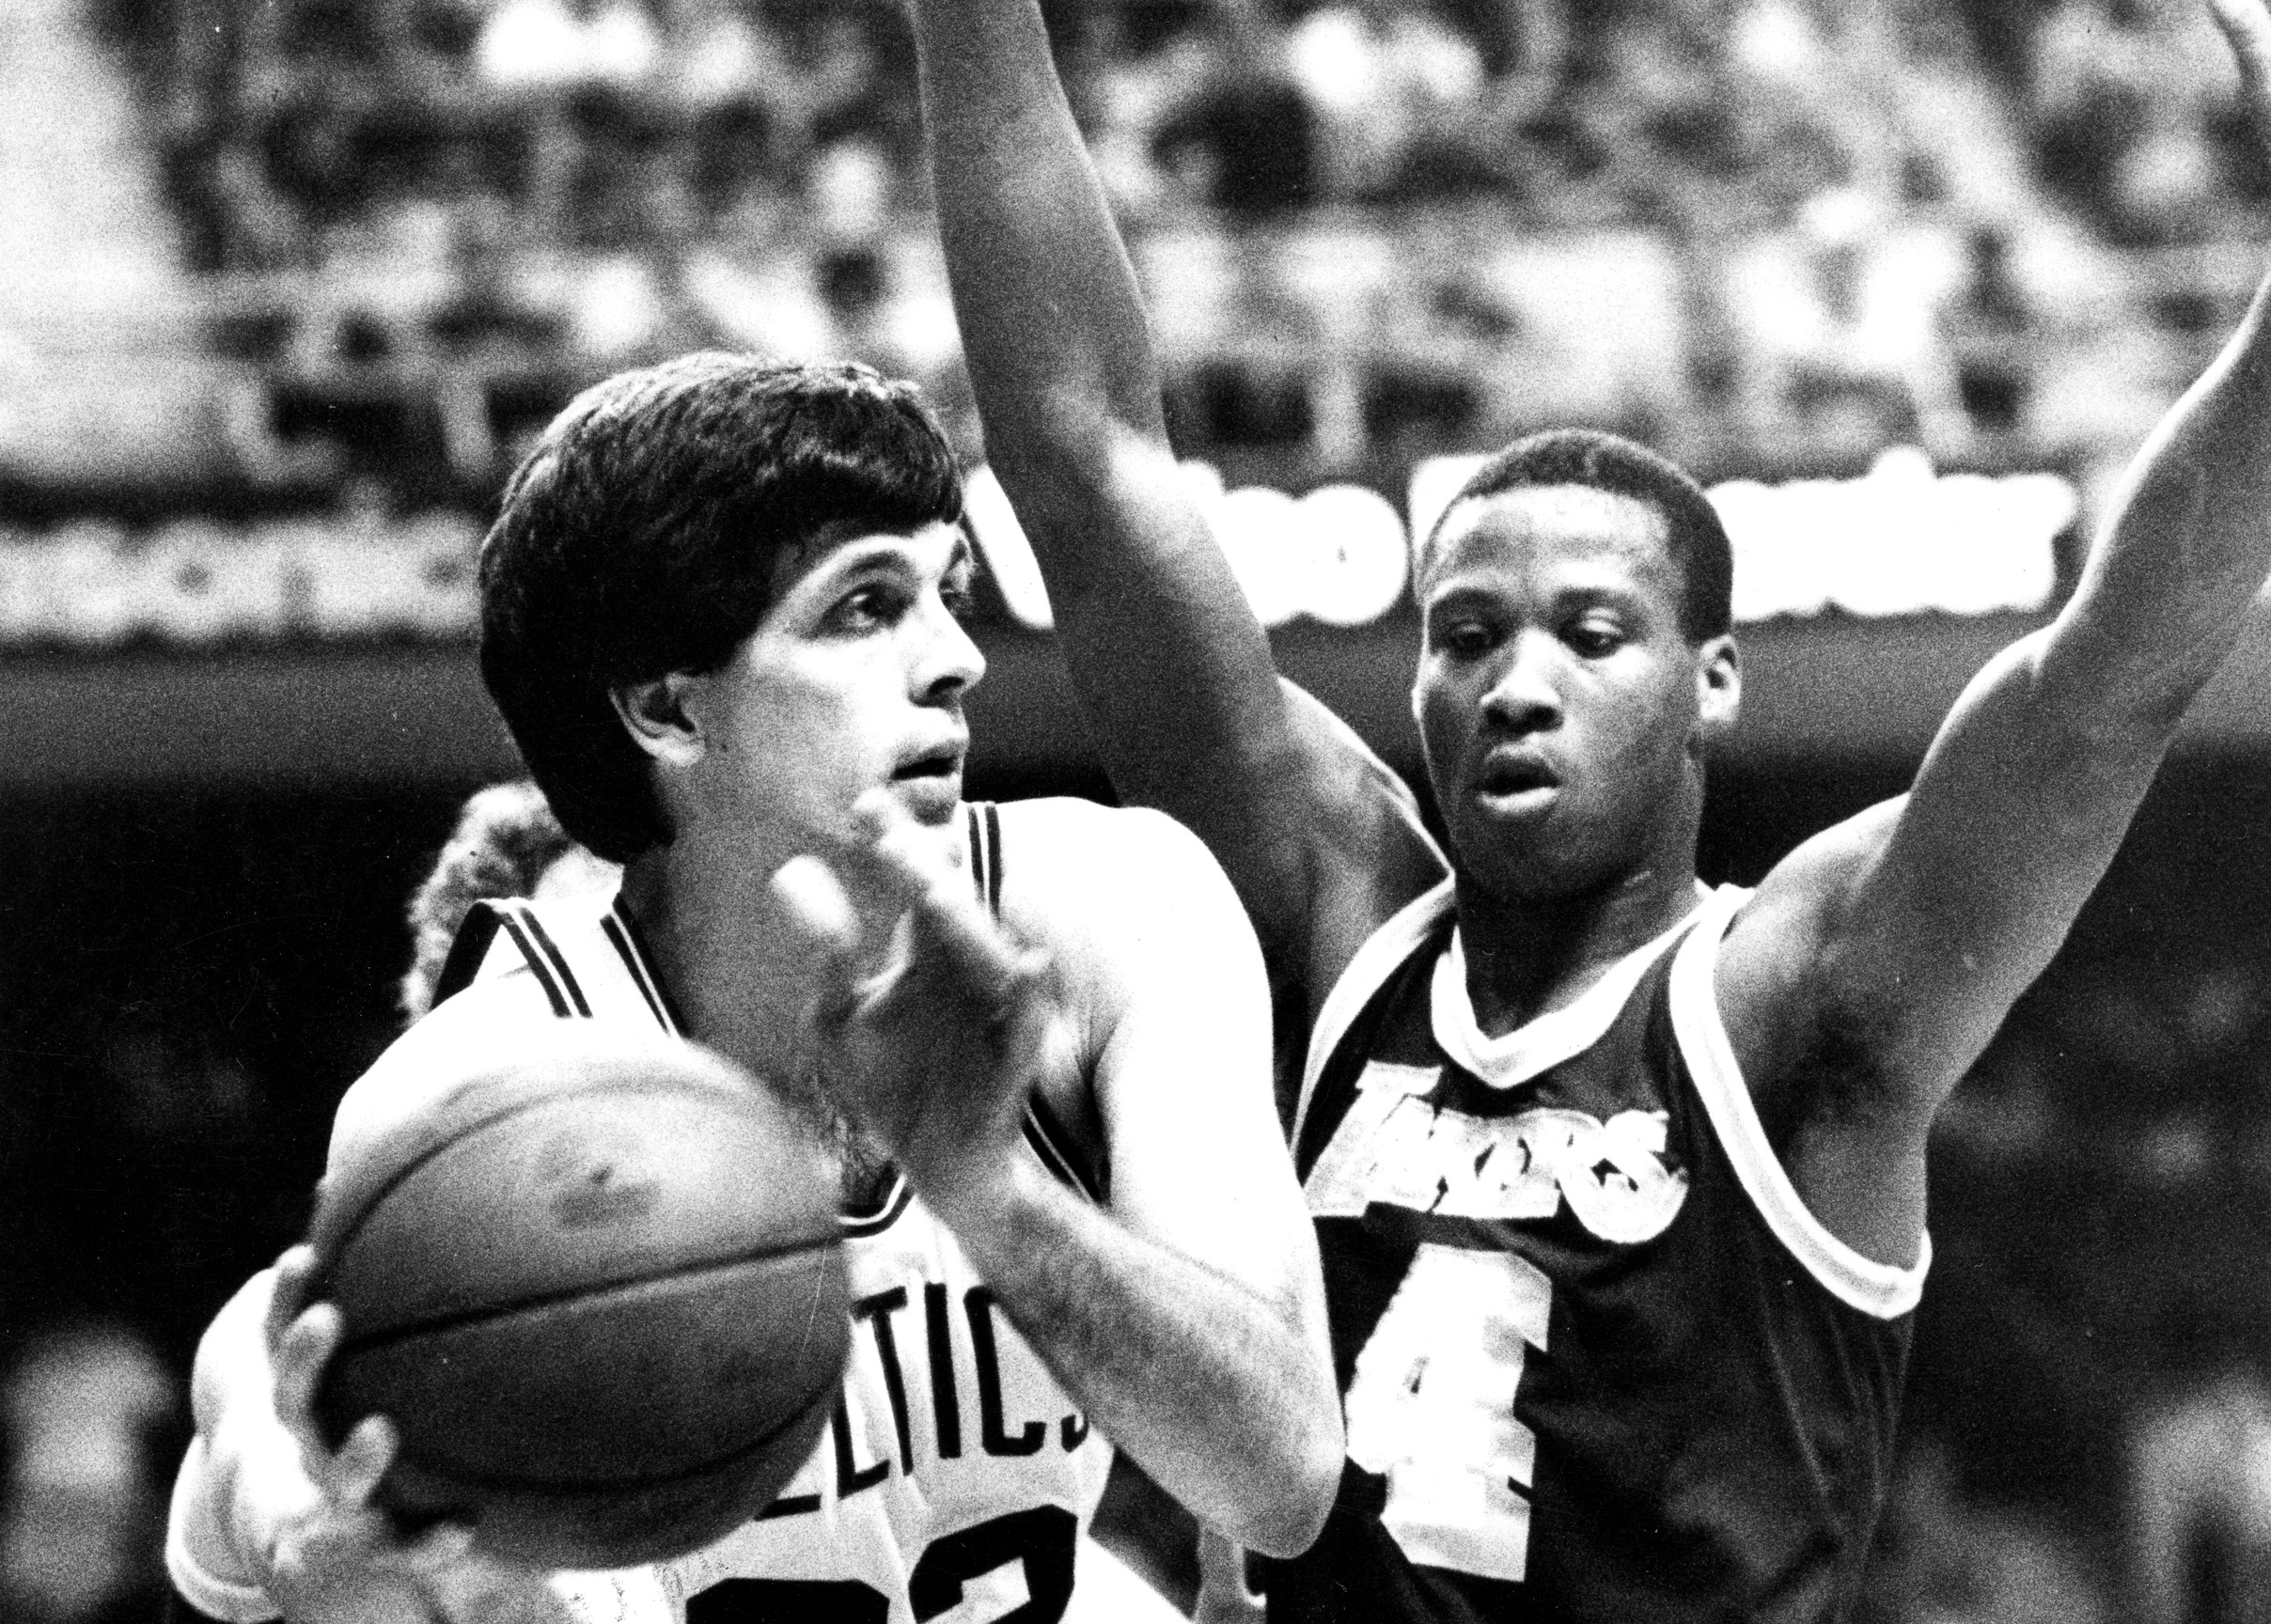 Boston Celtics' Kevin McHale is guarded by the Lakers' Byron Scott during Game 7 of the 1984 NBA Finals.